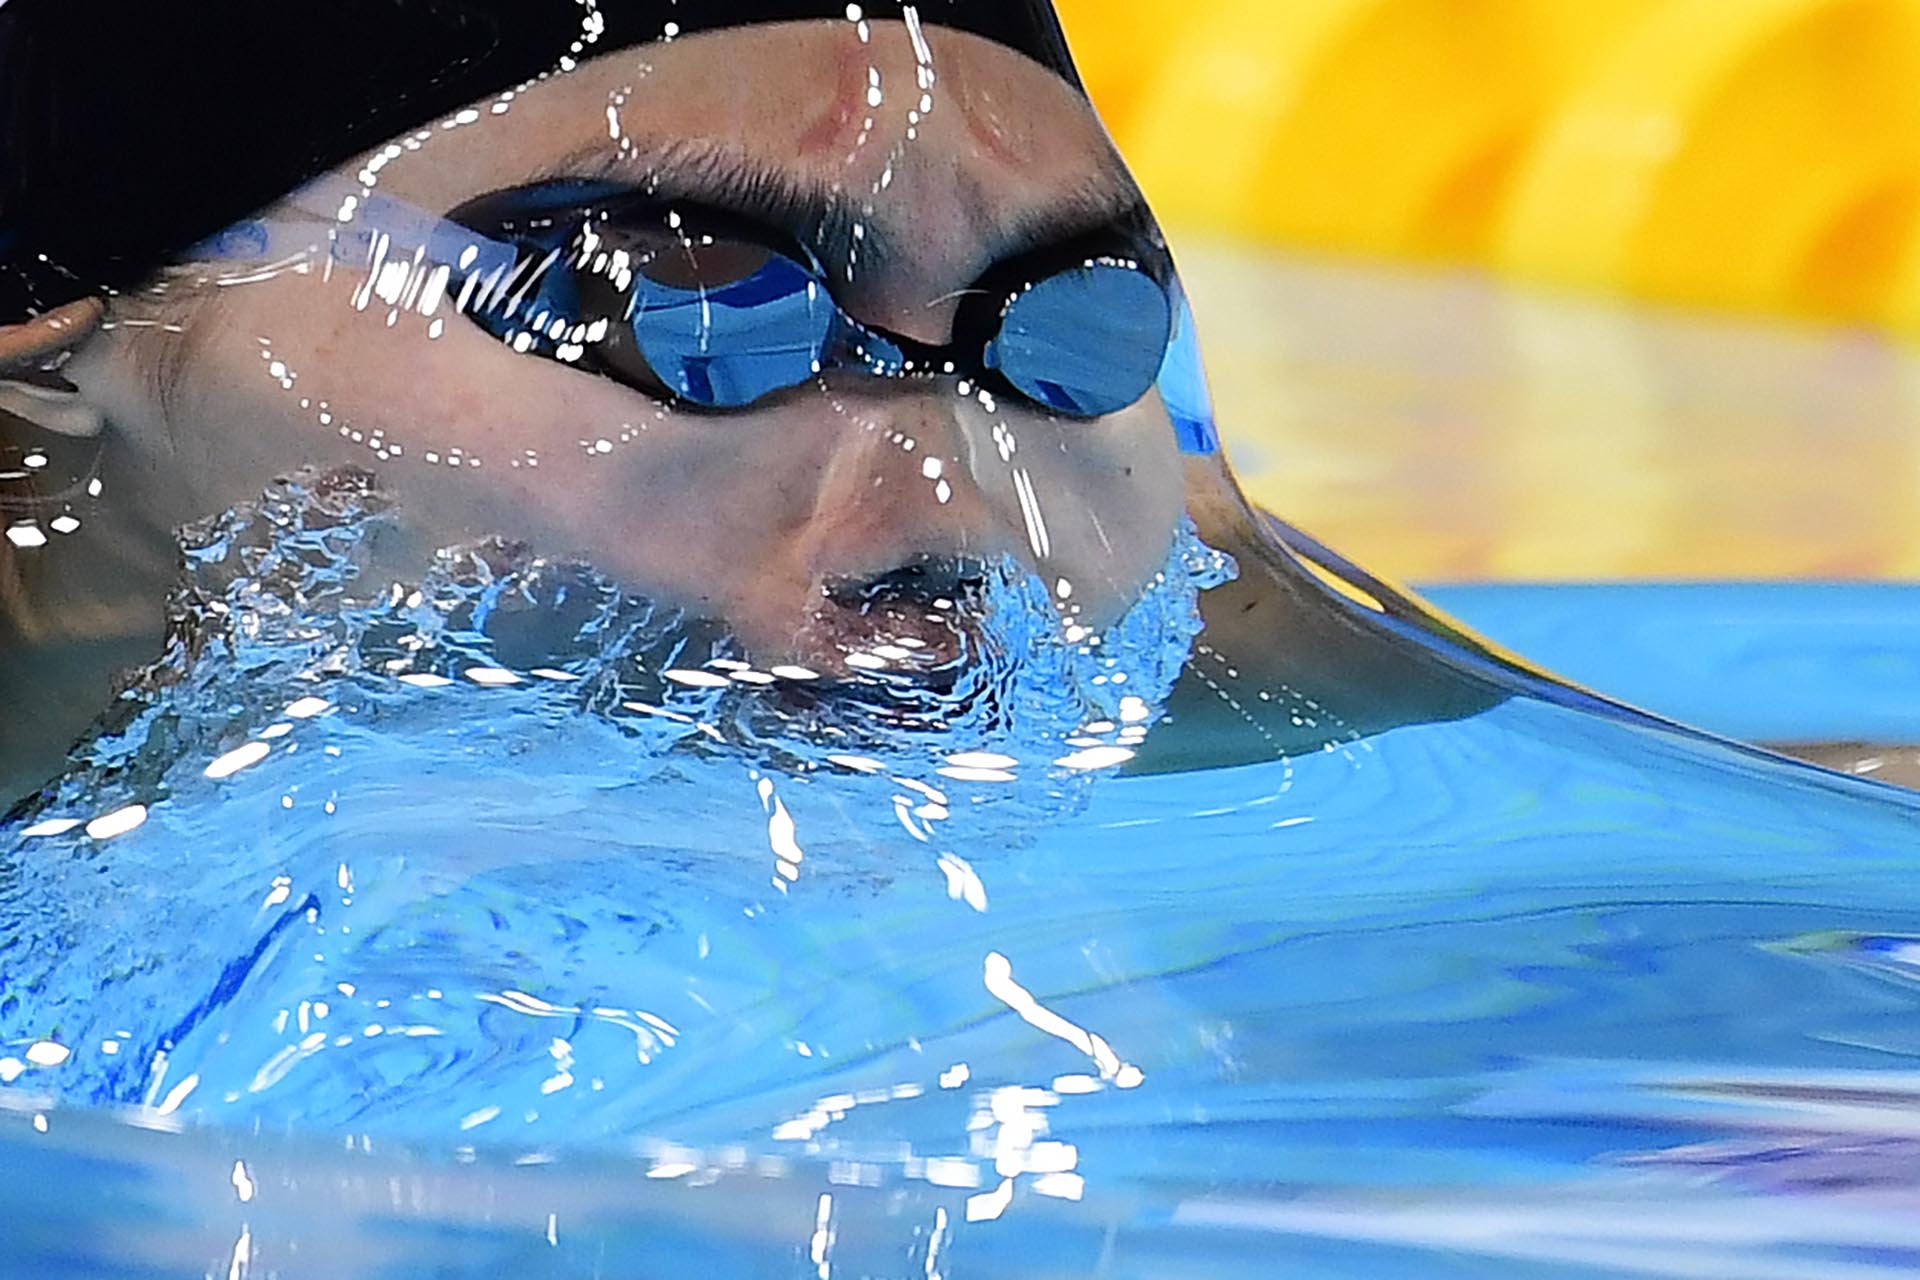 Japan's Reona Aoki competes in a women's 200m breaststroke heat during the swimming competition at the 2017 FINA World Championships in Budapest, on July 27, 2017.  / AFP PHOTO / Martin BUREAU